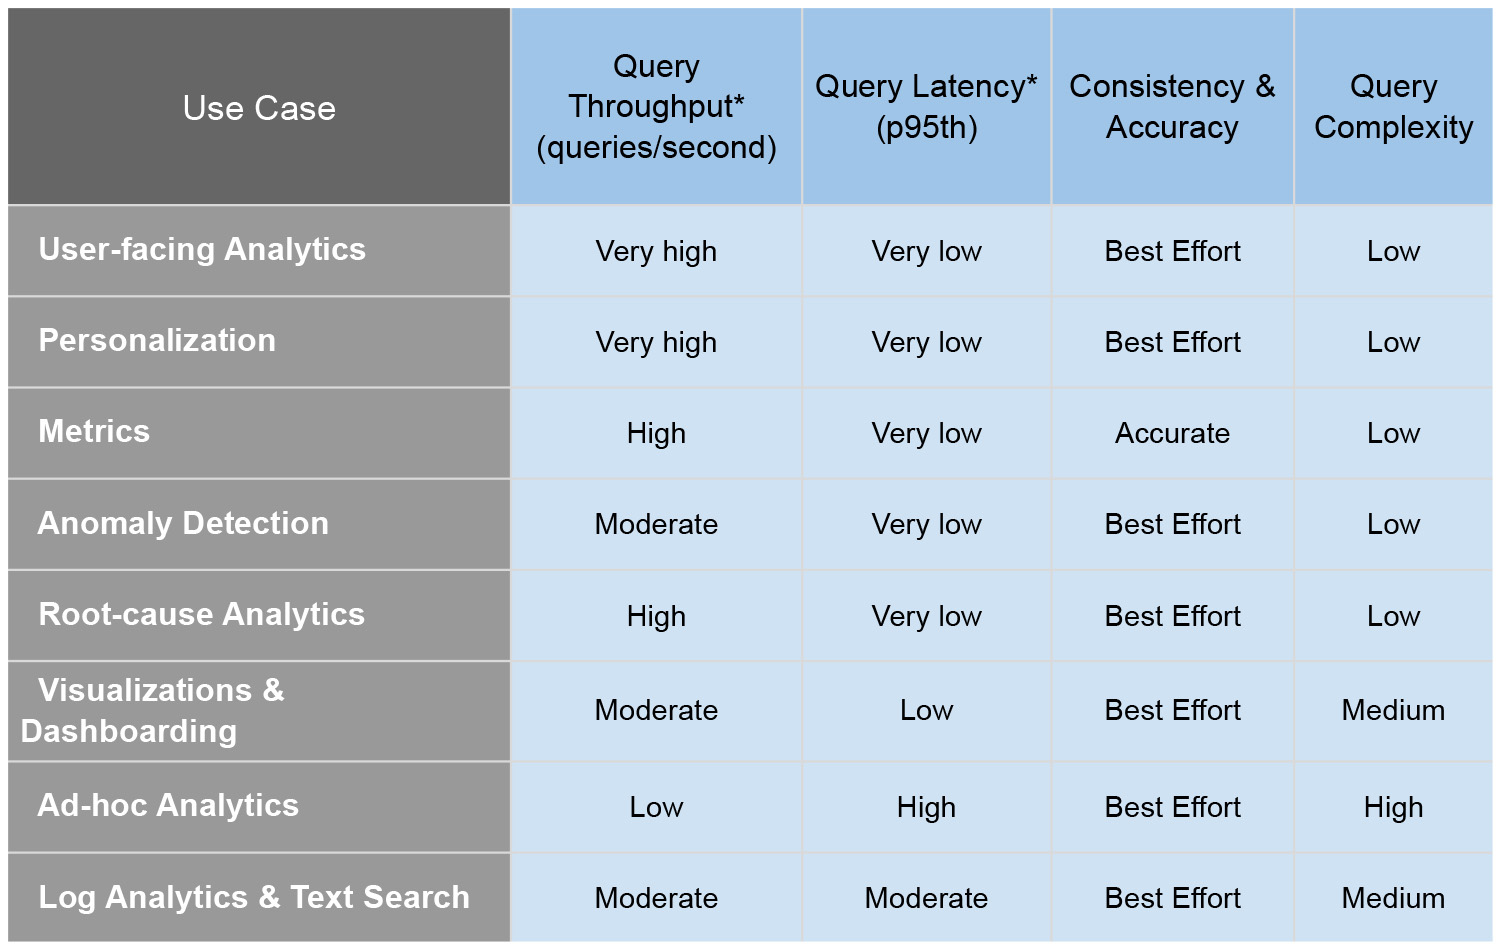 Chart detailing use case and associated query throughput, latency, consistency and accuracy, and complexity